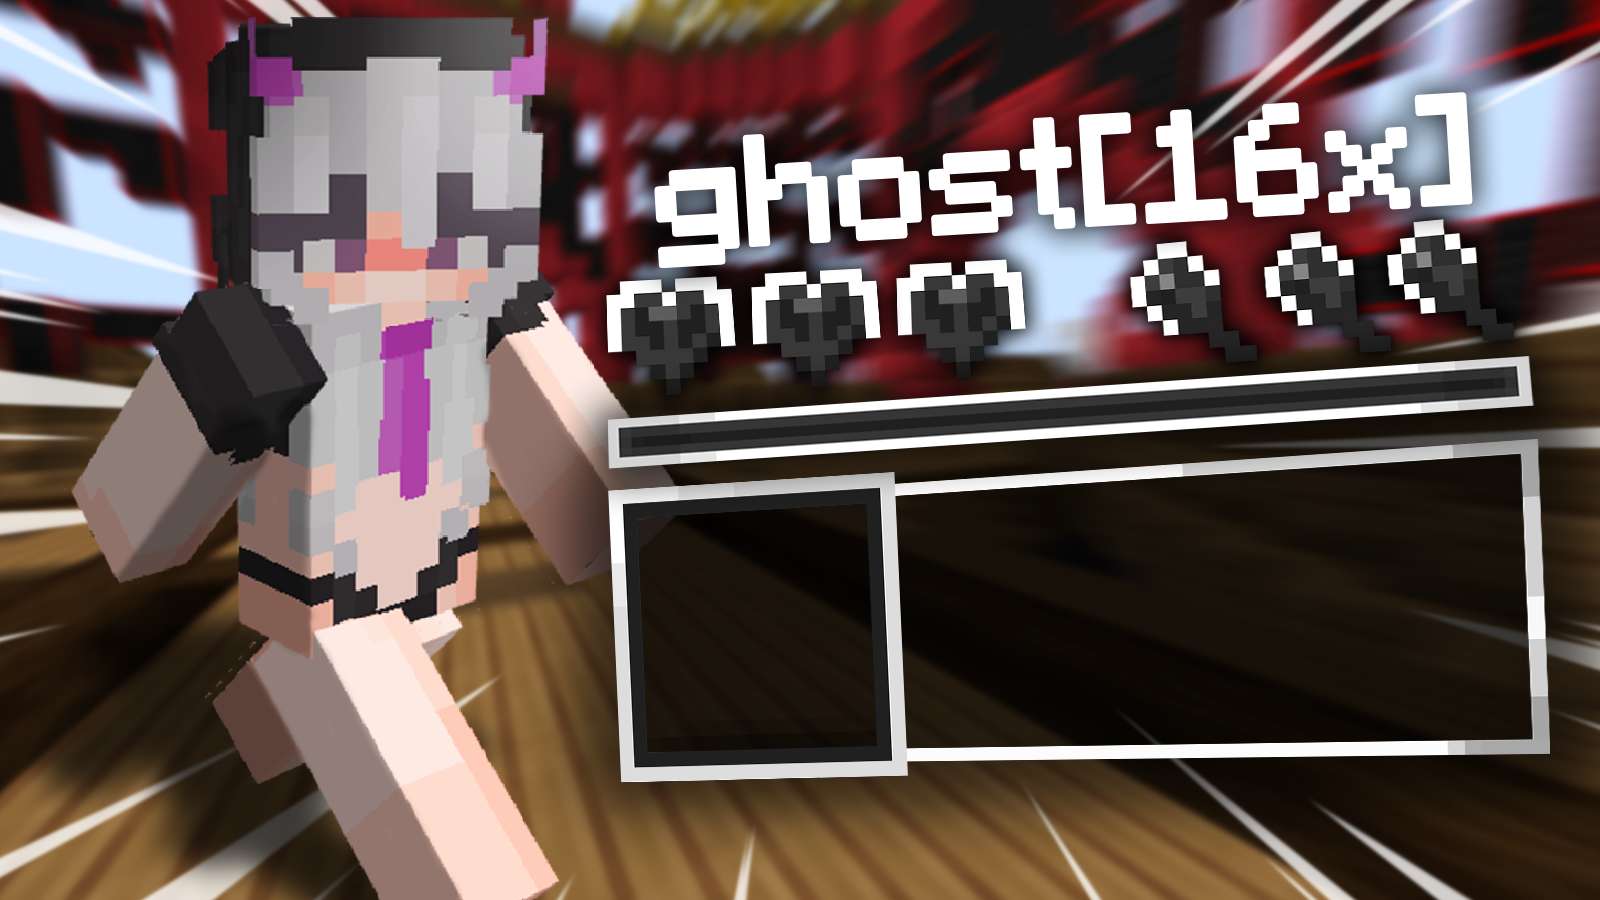 ghost 16x by rookery on PvPRP